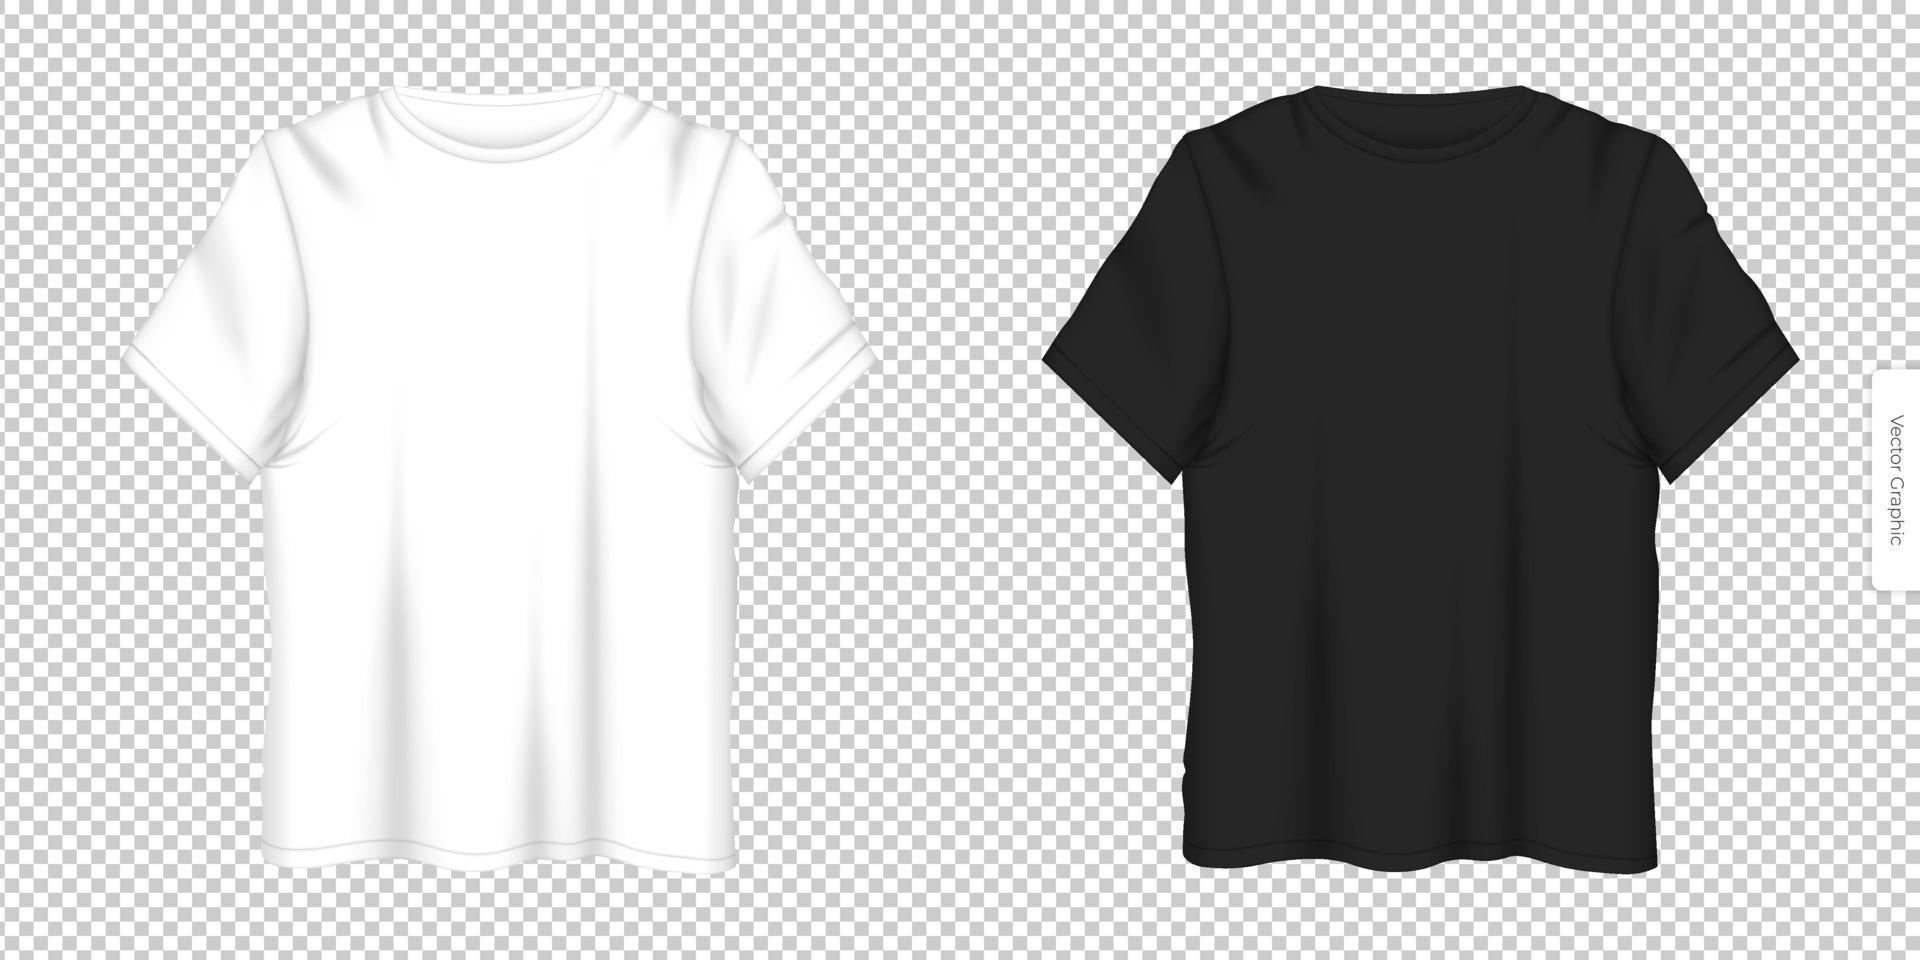 Realistic vector illustration ESP 10 t-shirt layout, vector set of white and black t-shirt layouts with front view universal solution for advertising fashion clothing for men and women